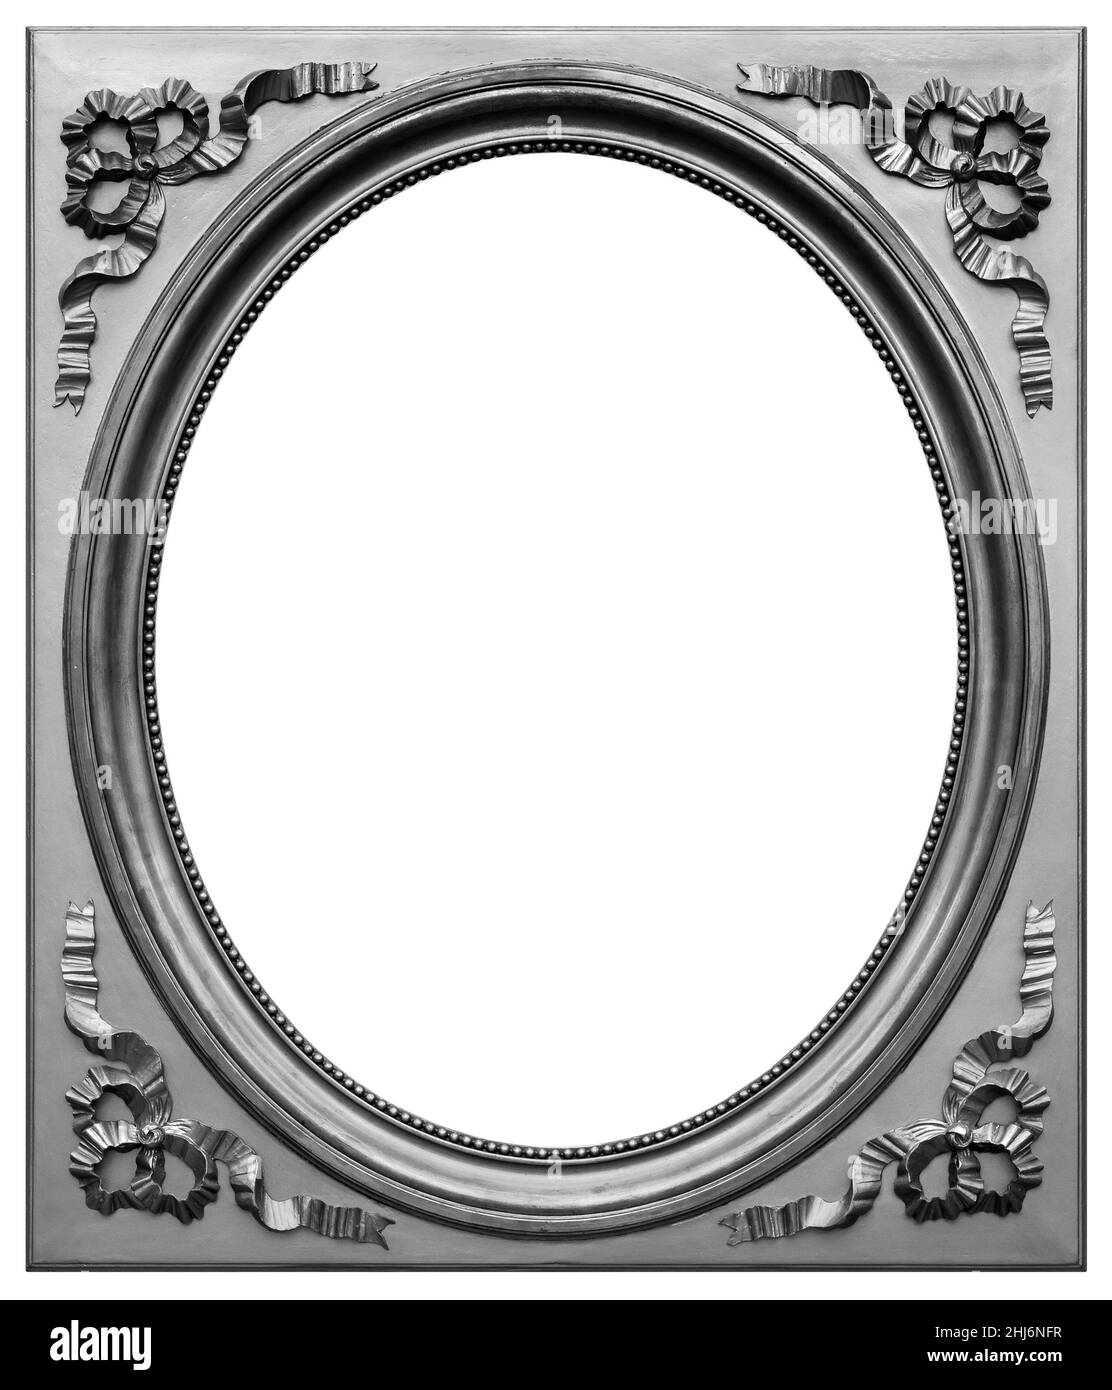 Old wooden square oval silver, silver-plated frame isolated on the white background Stock Photo